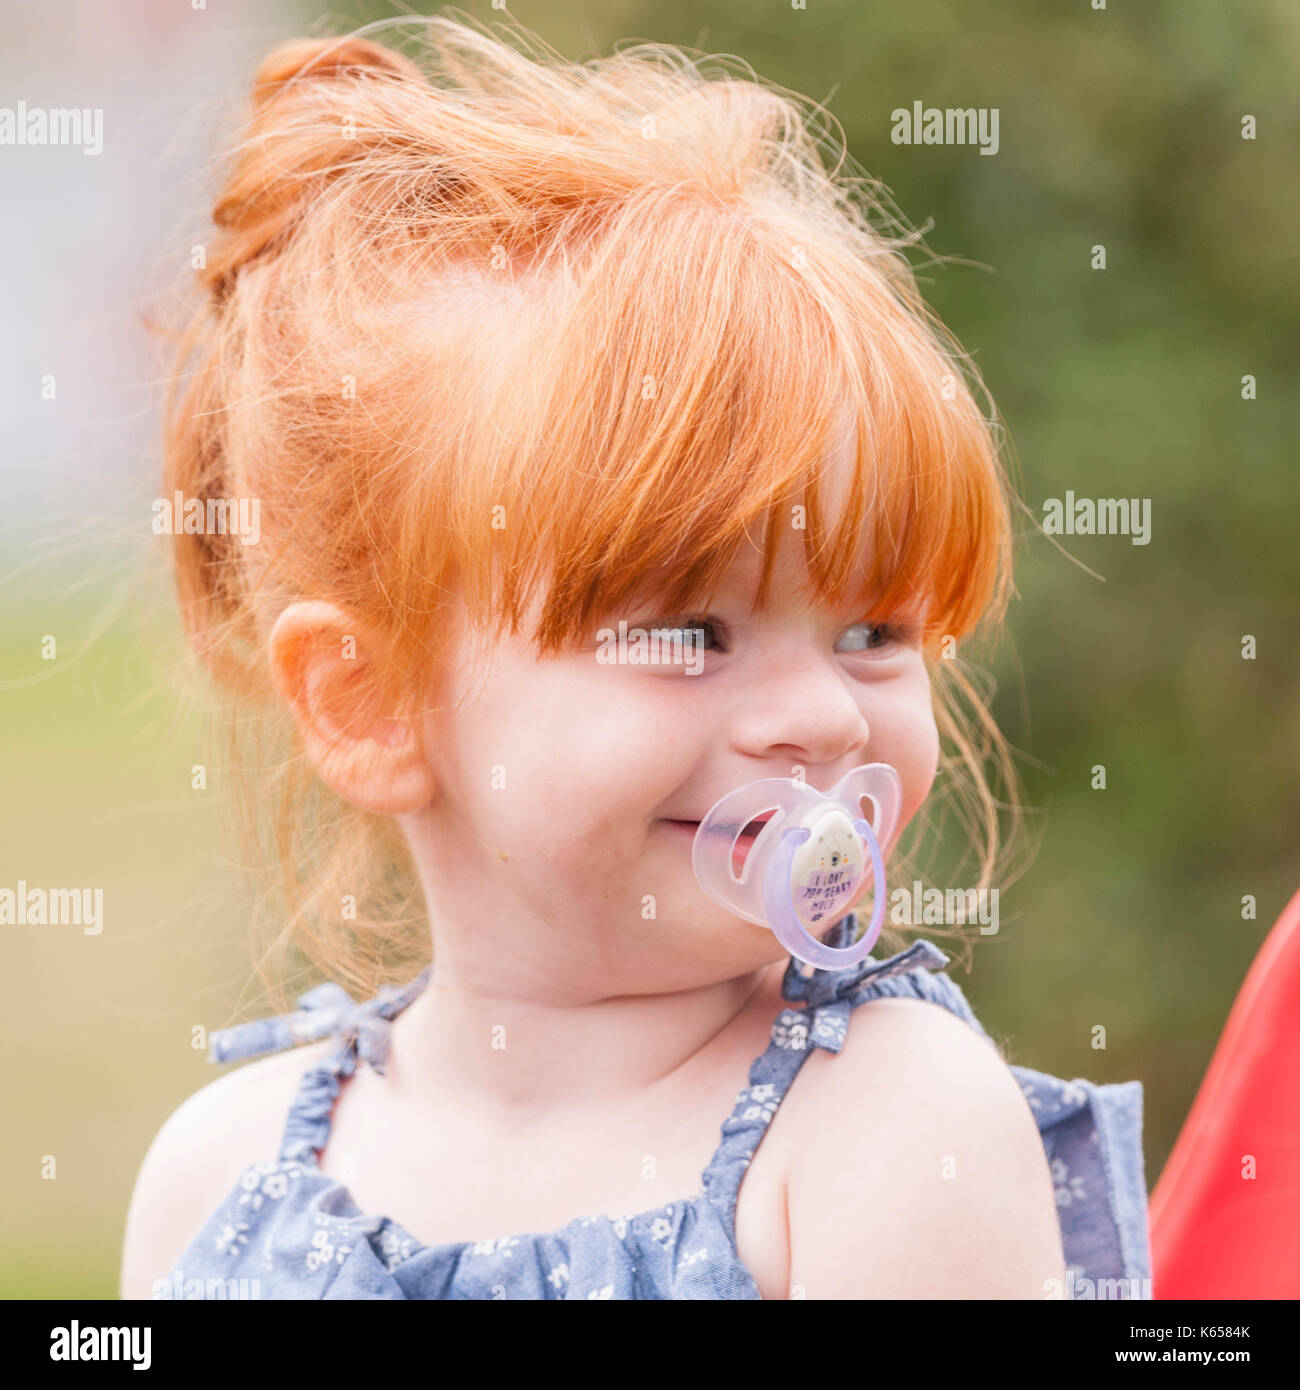 A MODEL RELEASED 2 year old girl with ginger hair and a dummy outdoors in the Uk Stock Photo